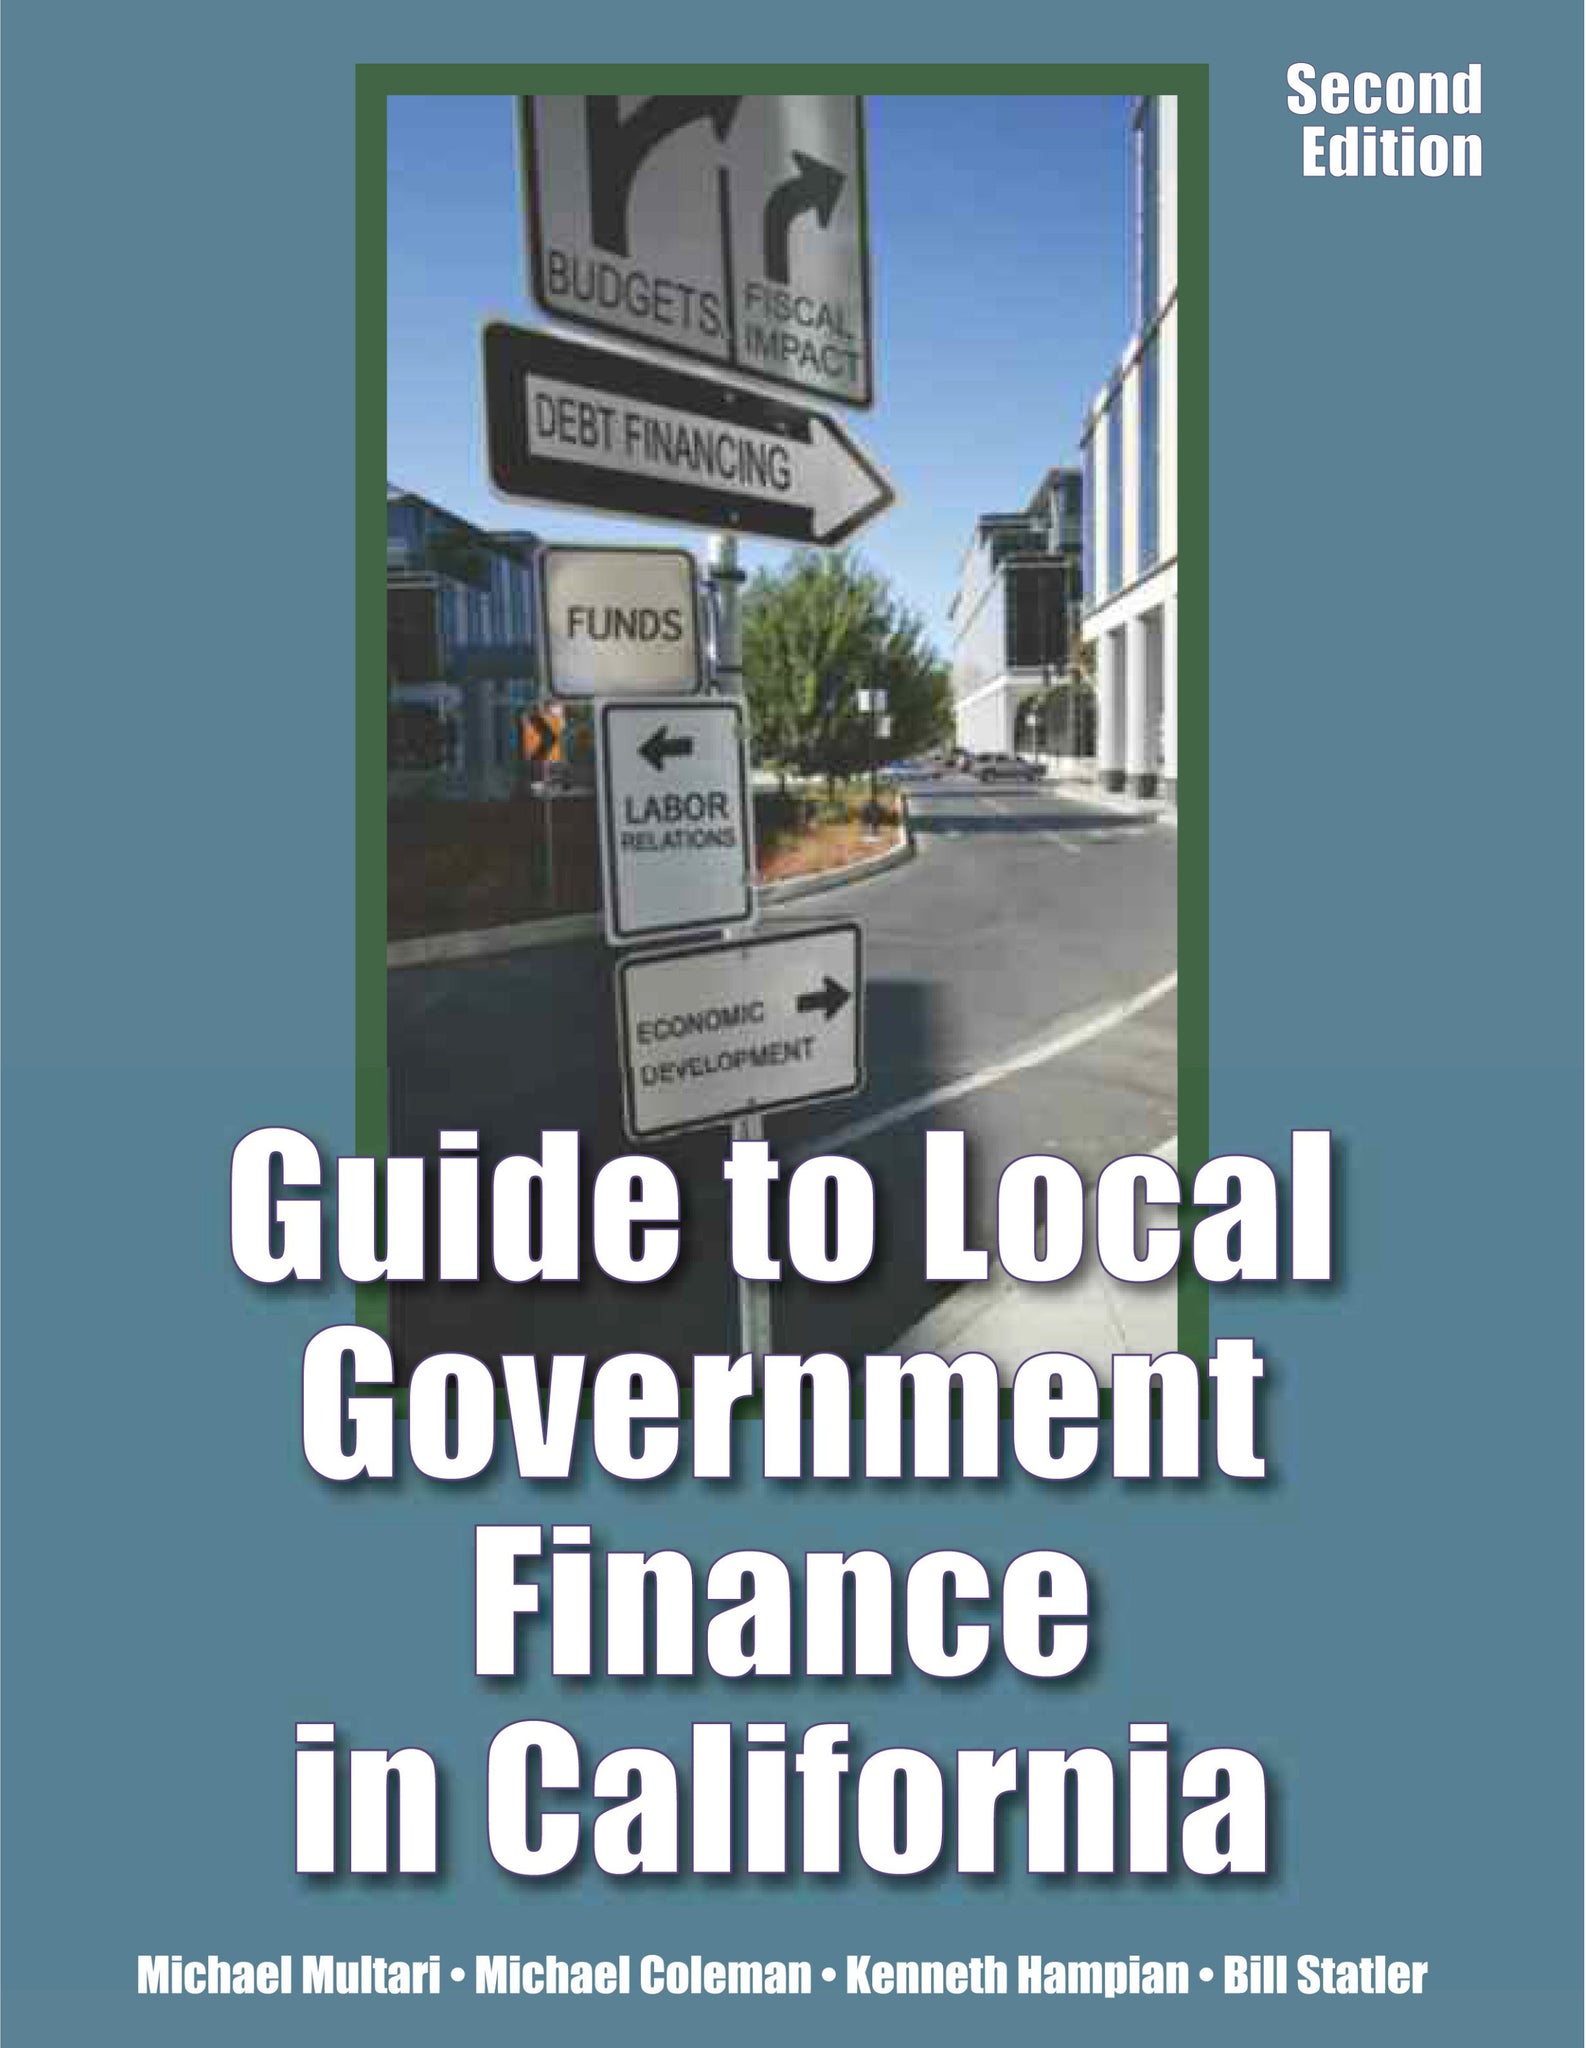 Guide to Local Government Finance in California, 2nd edition